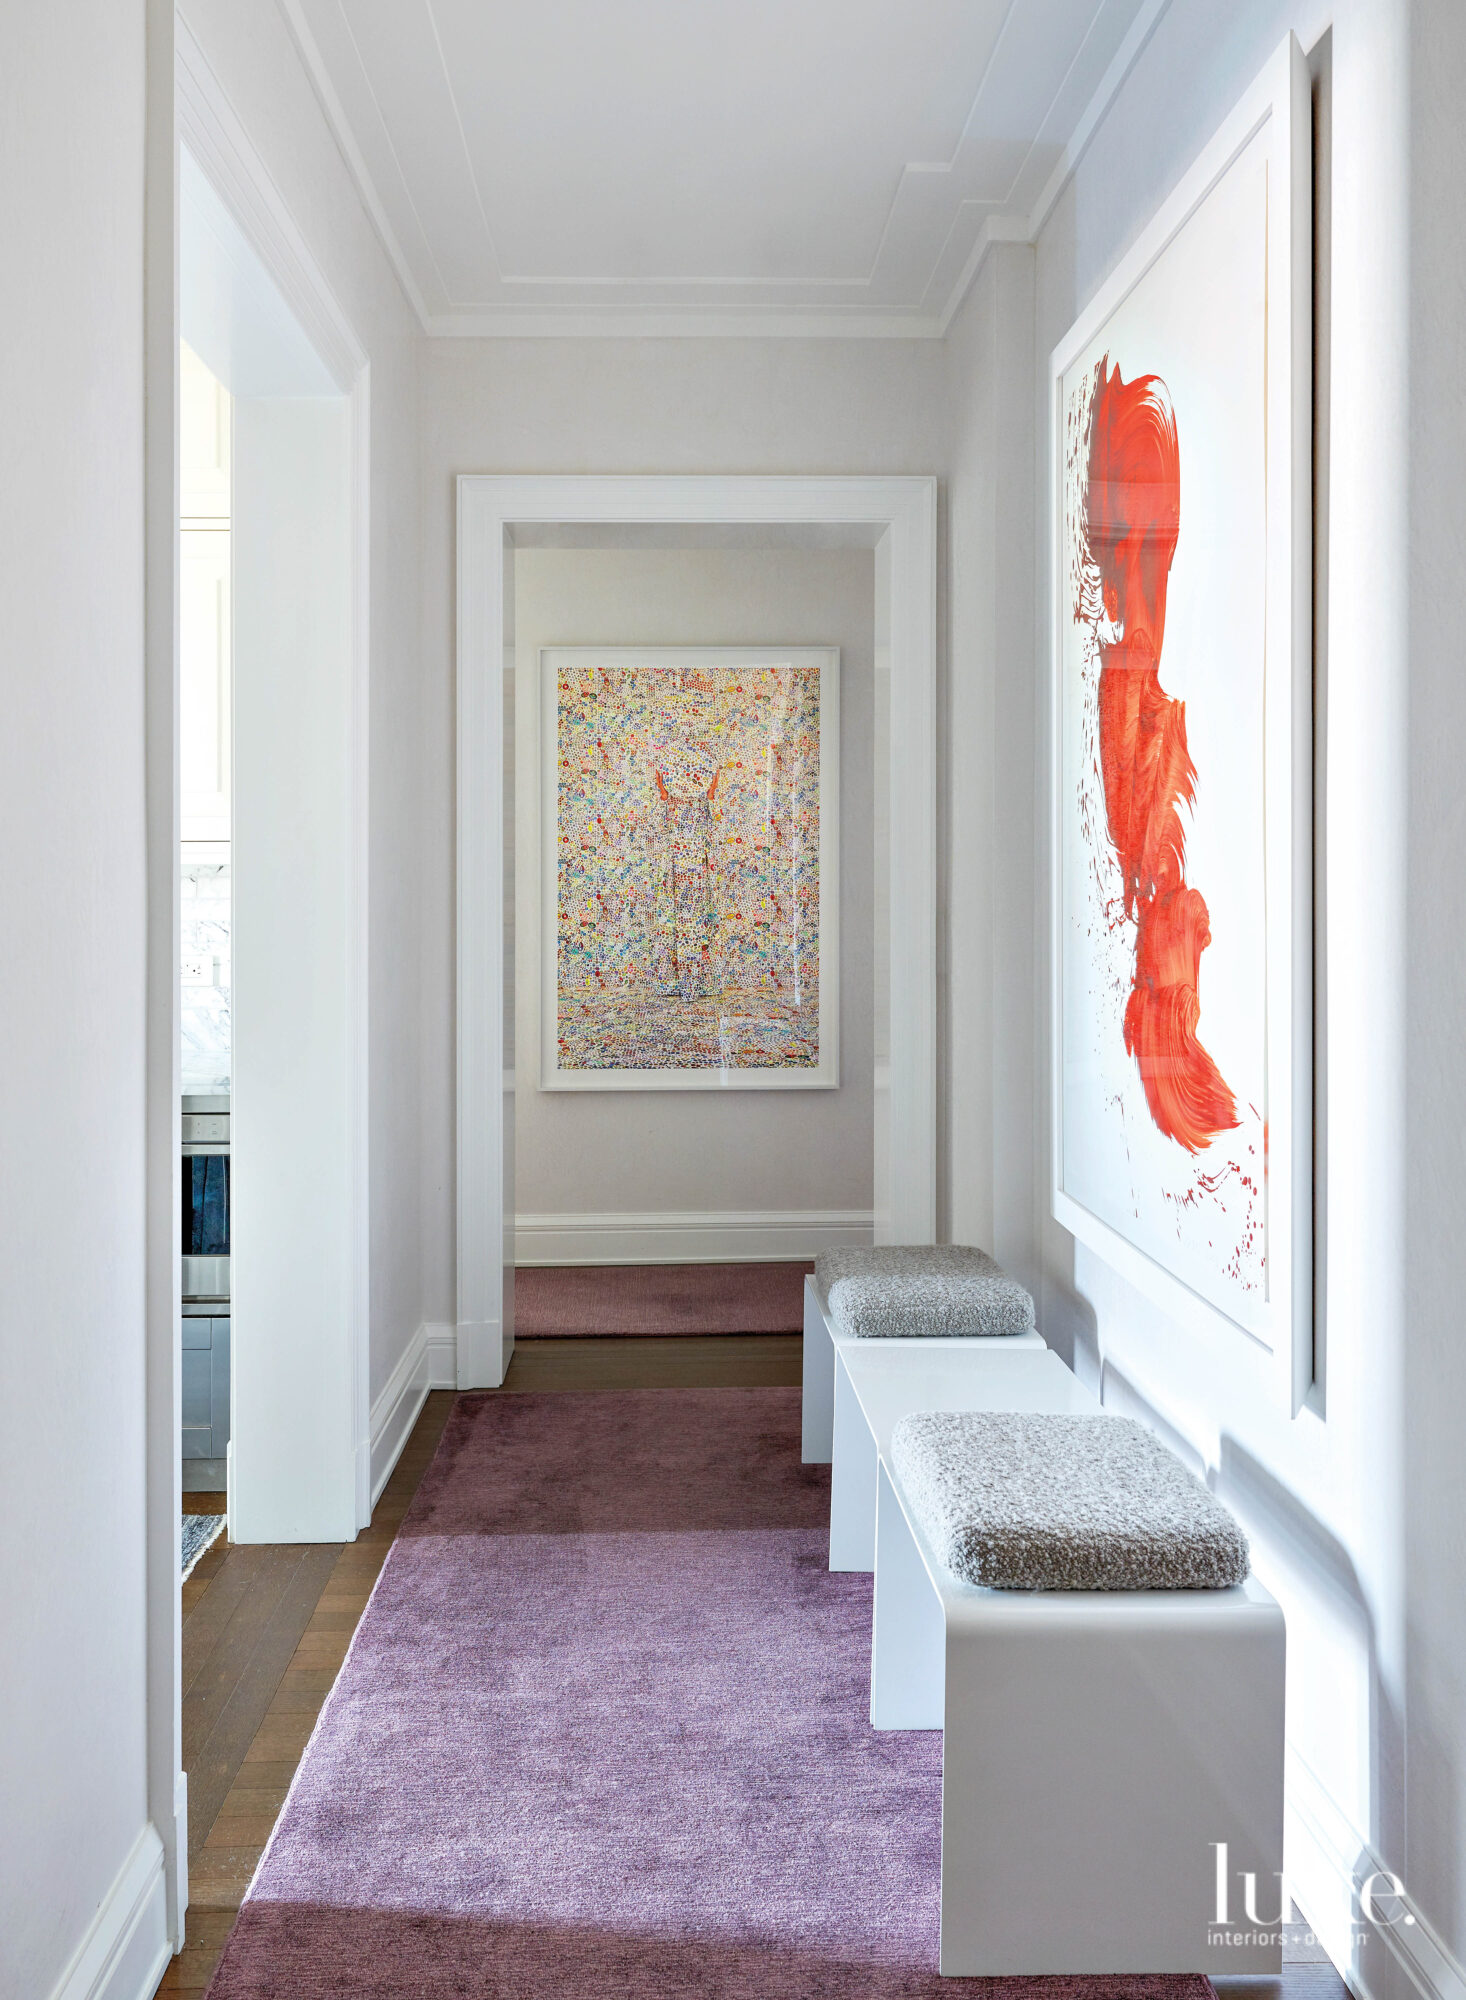 A wide hallway with benches sitting in front of a bright accent painting.